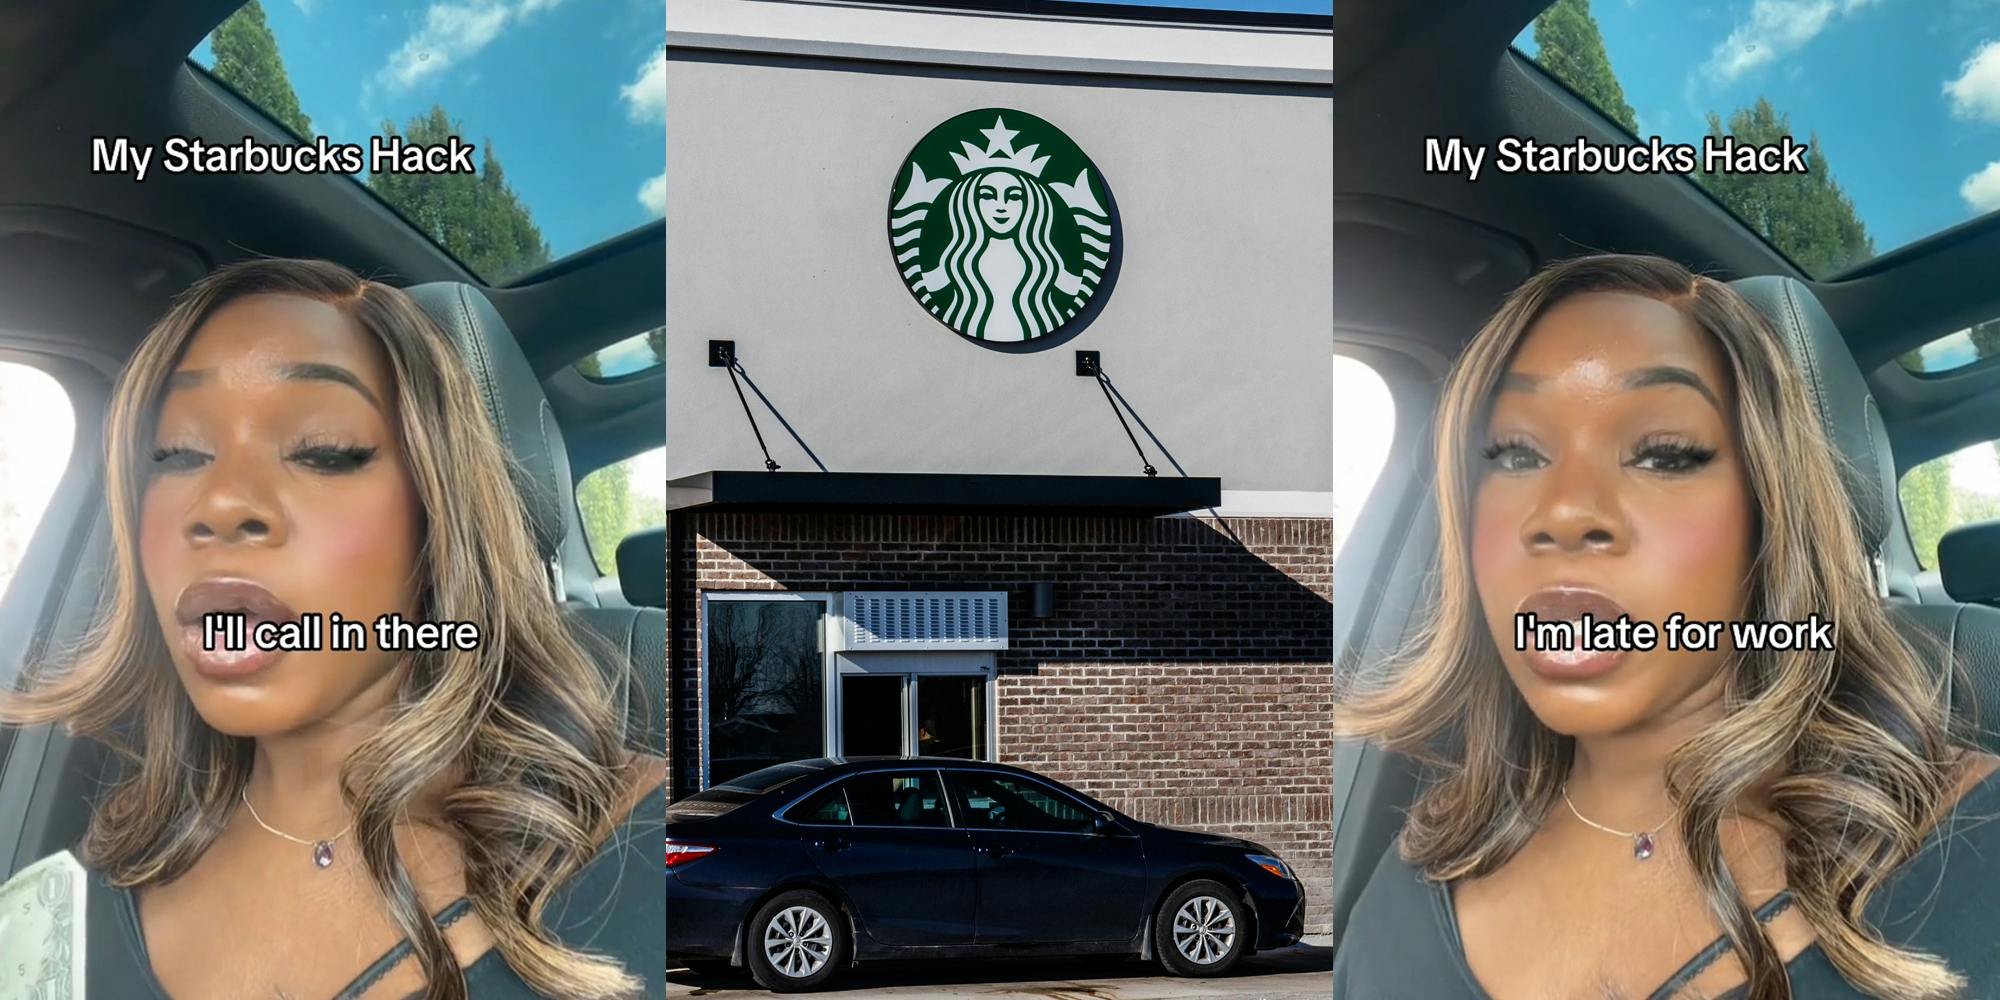 'This is Karen behavior not a hack': Starbucks customer says she calls store to tell them she's late for work whenever she doesn't want to wait in drive-thru line